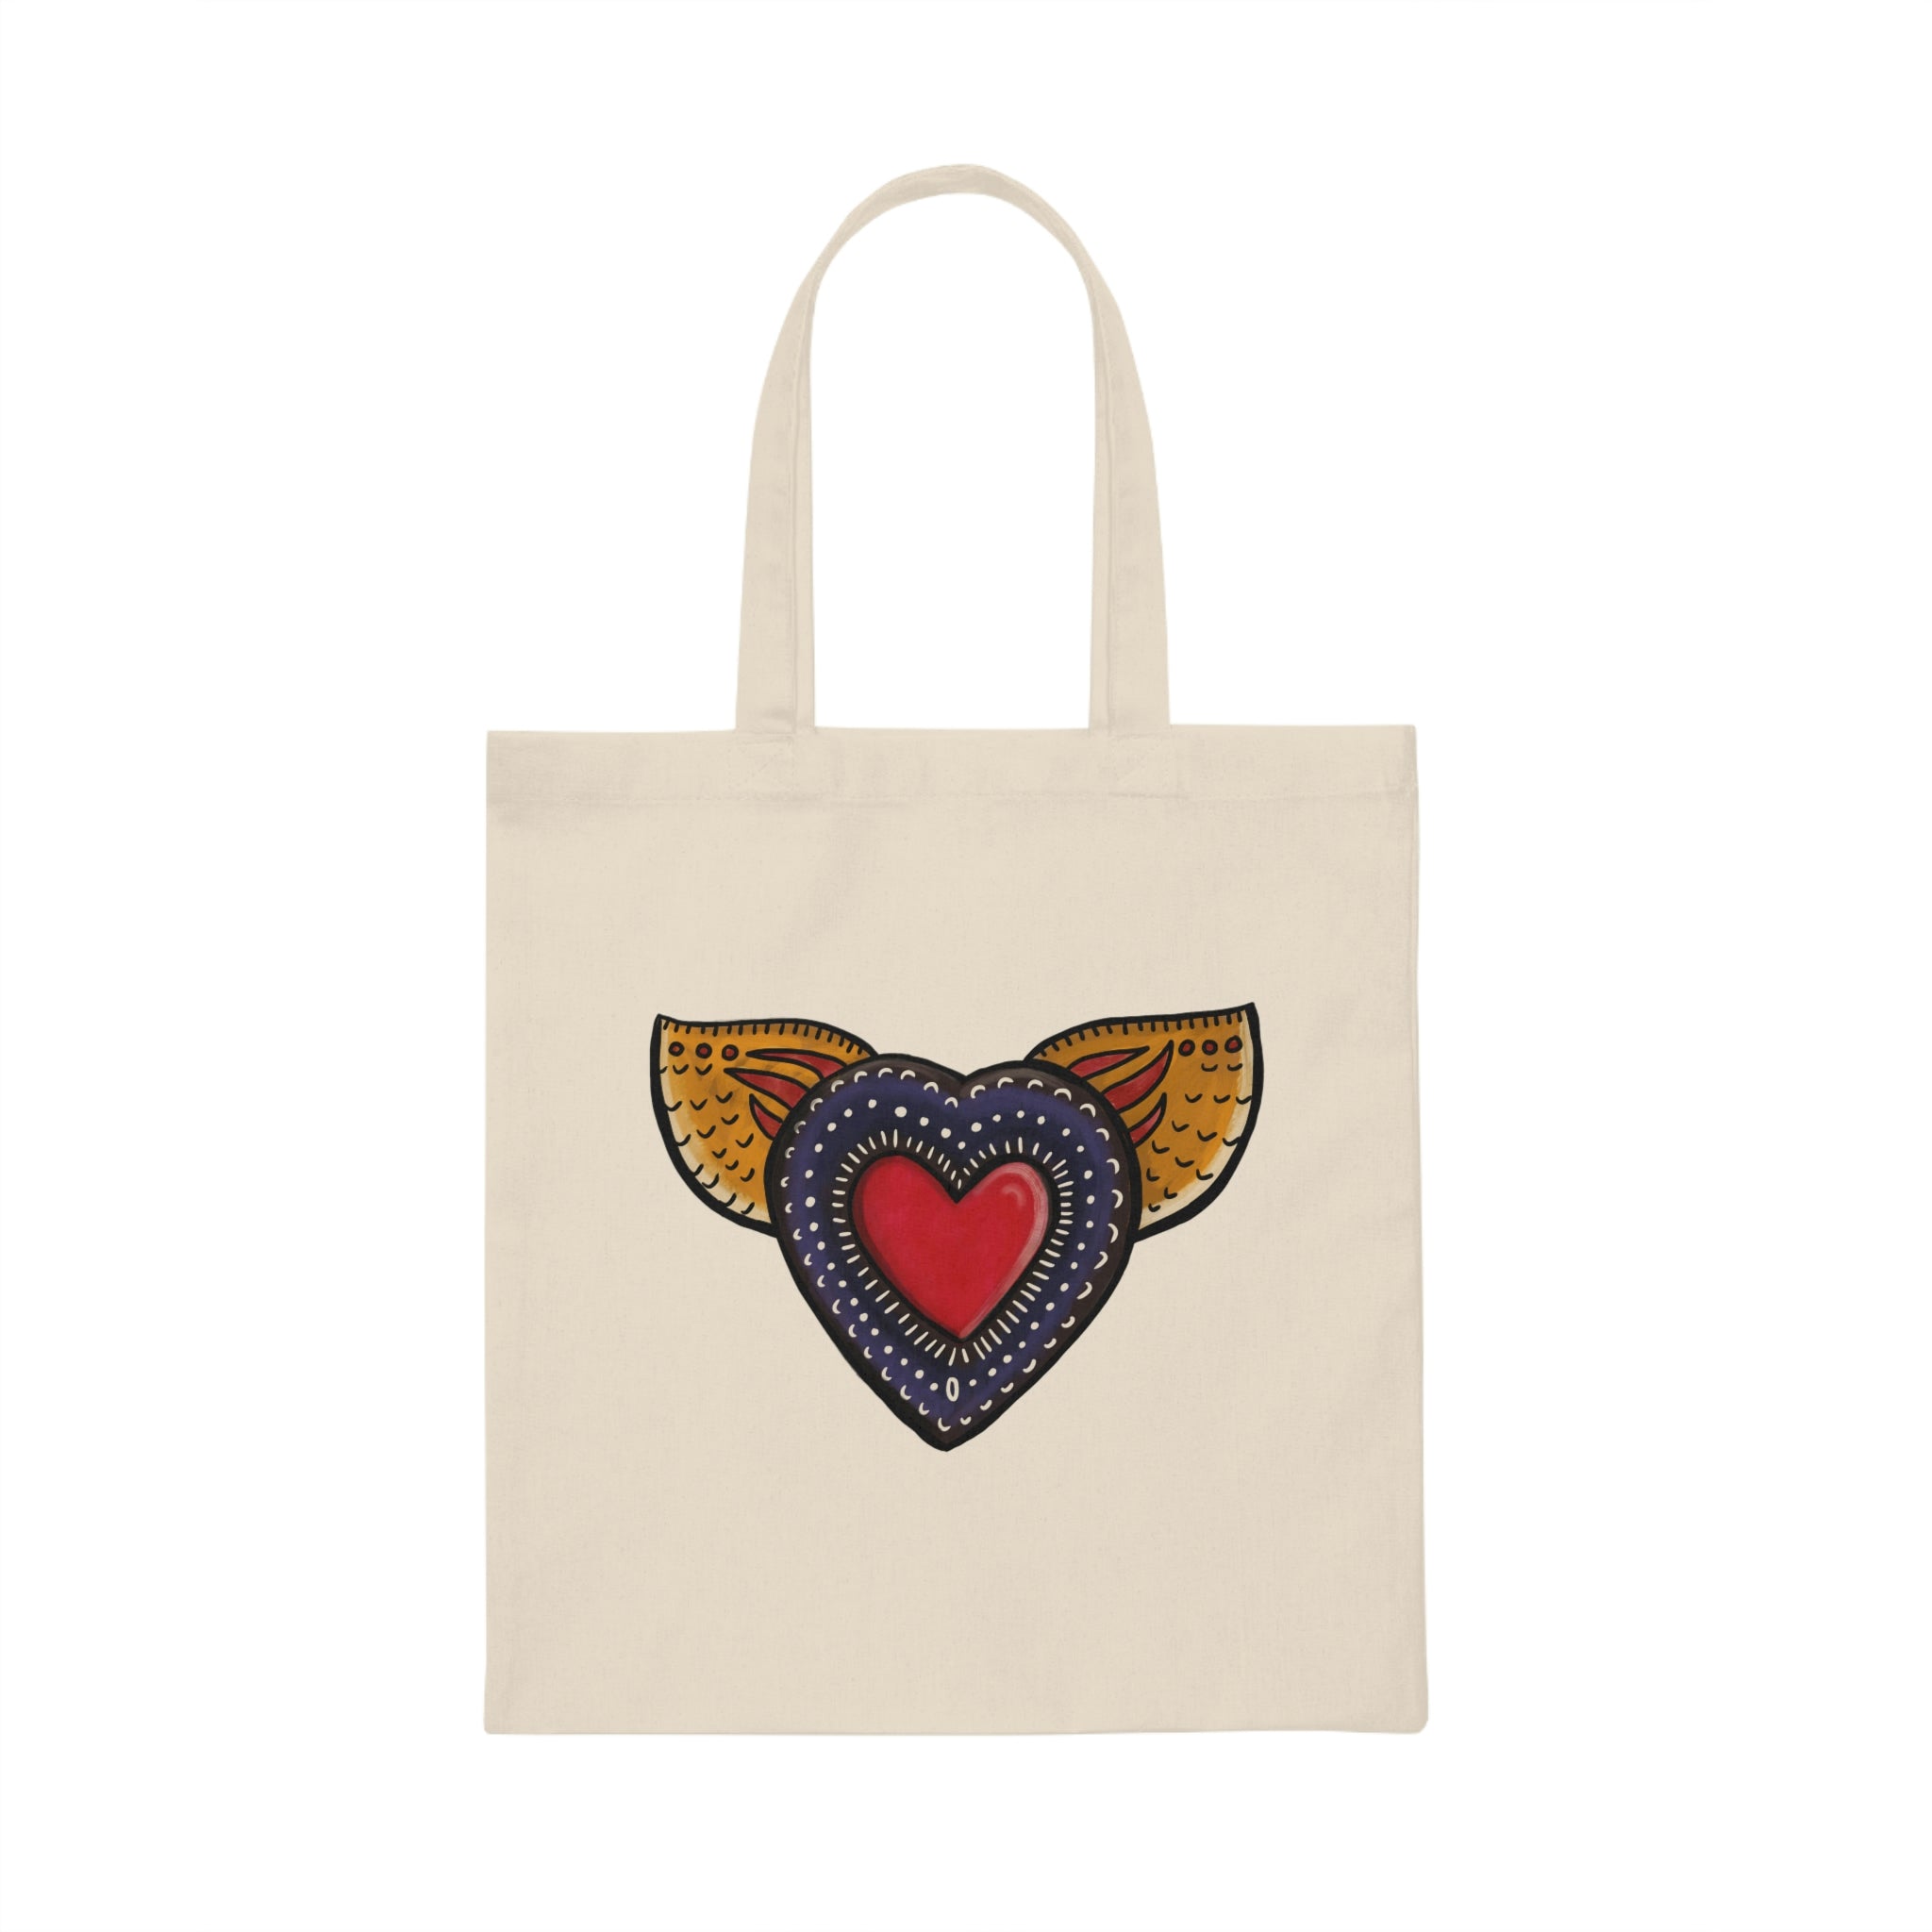 A canvas tote bag displaying a bold and bright graffiti-style heart with golden wings, symbolizing the idea of freedom